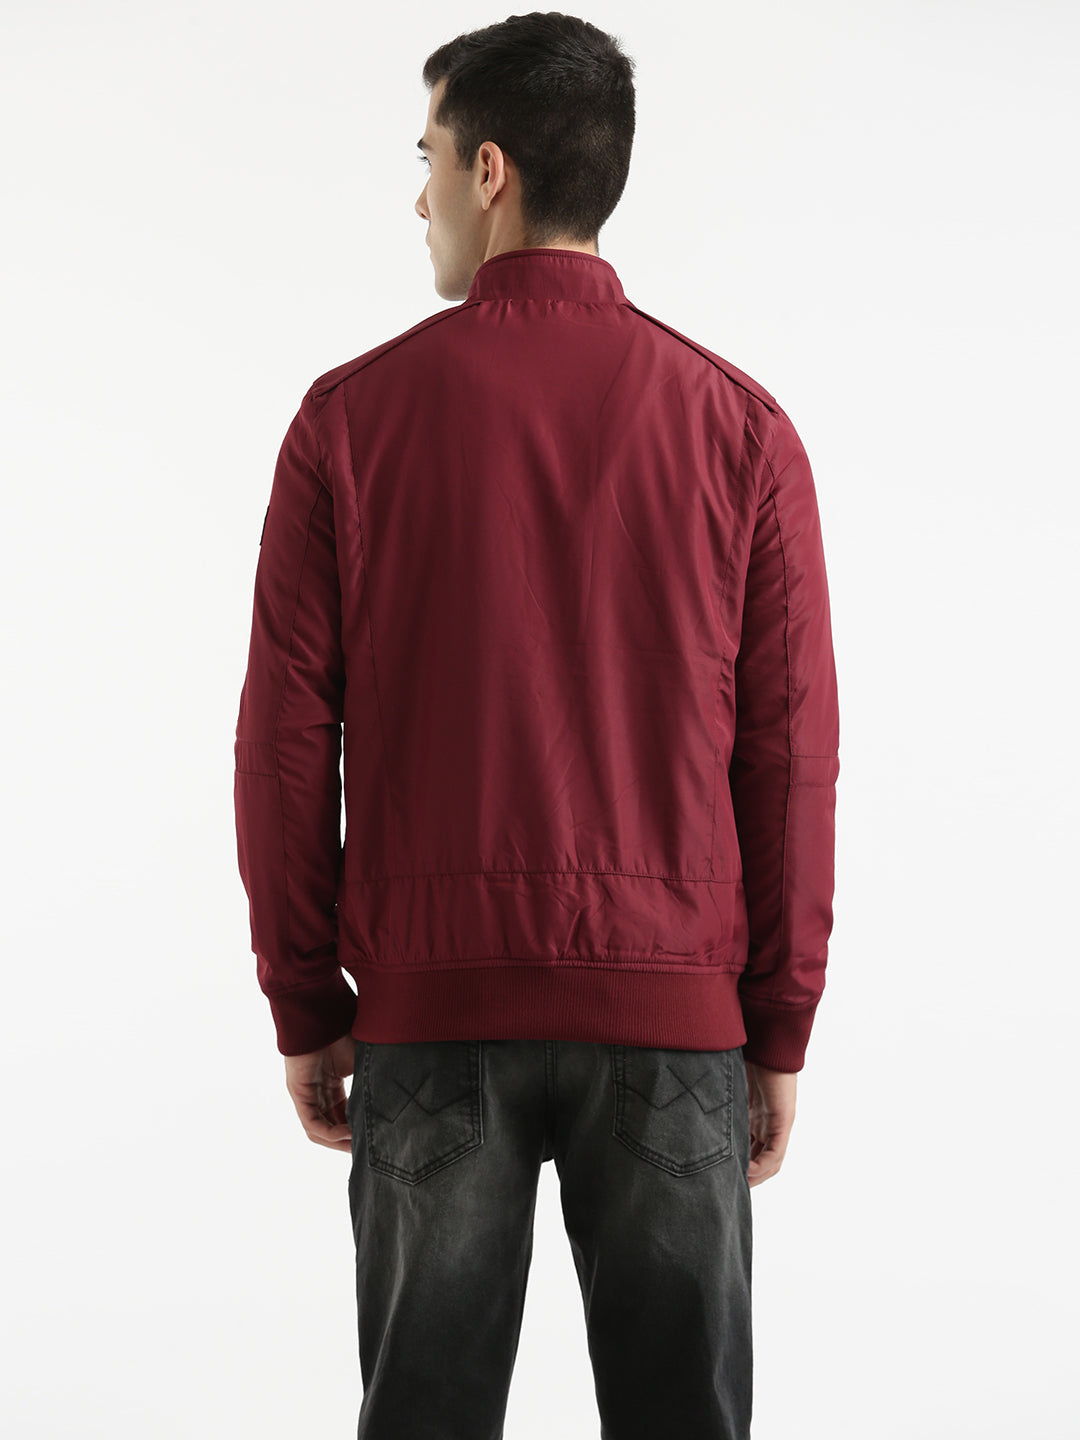 Solid Red Technical Jacket